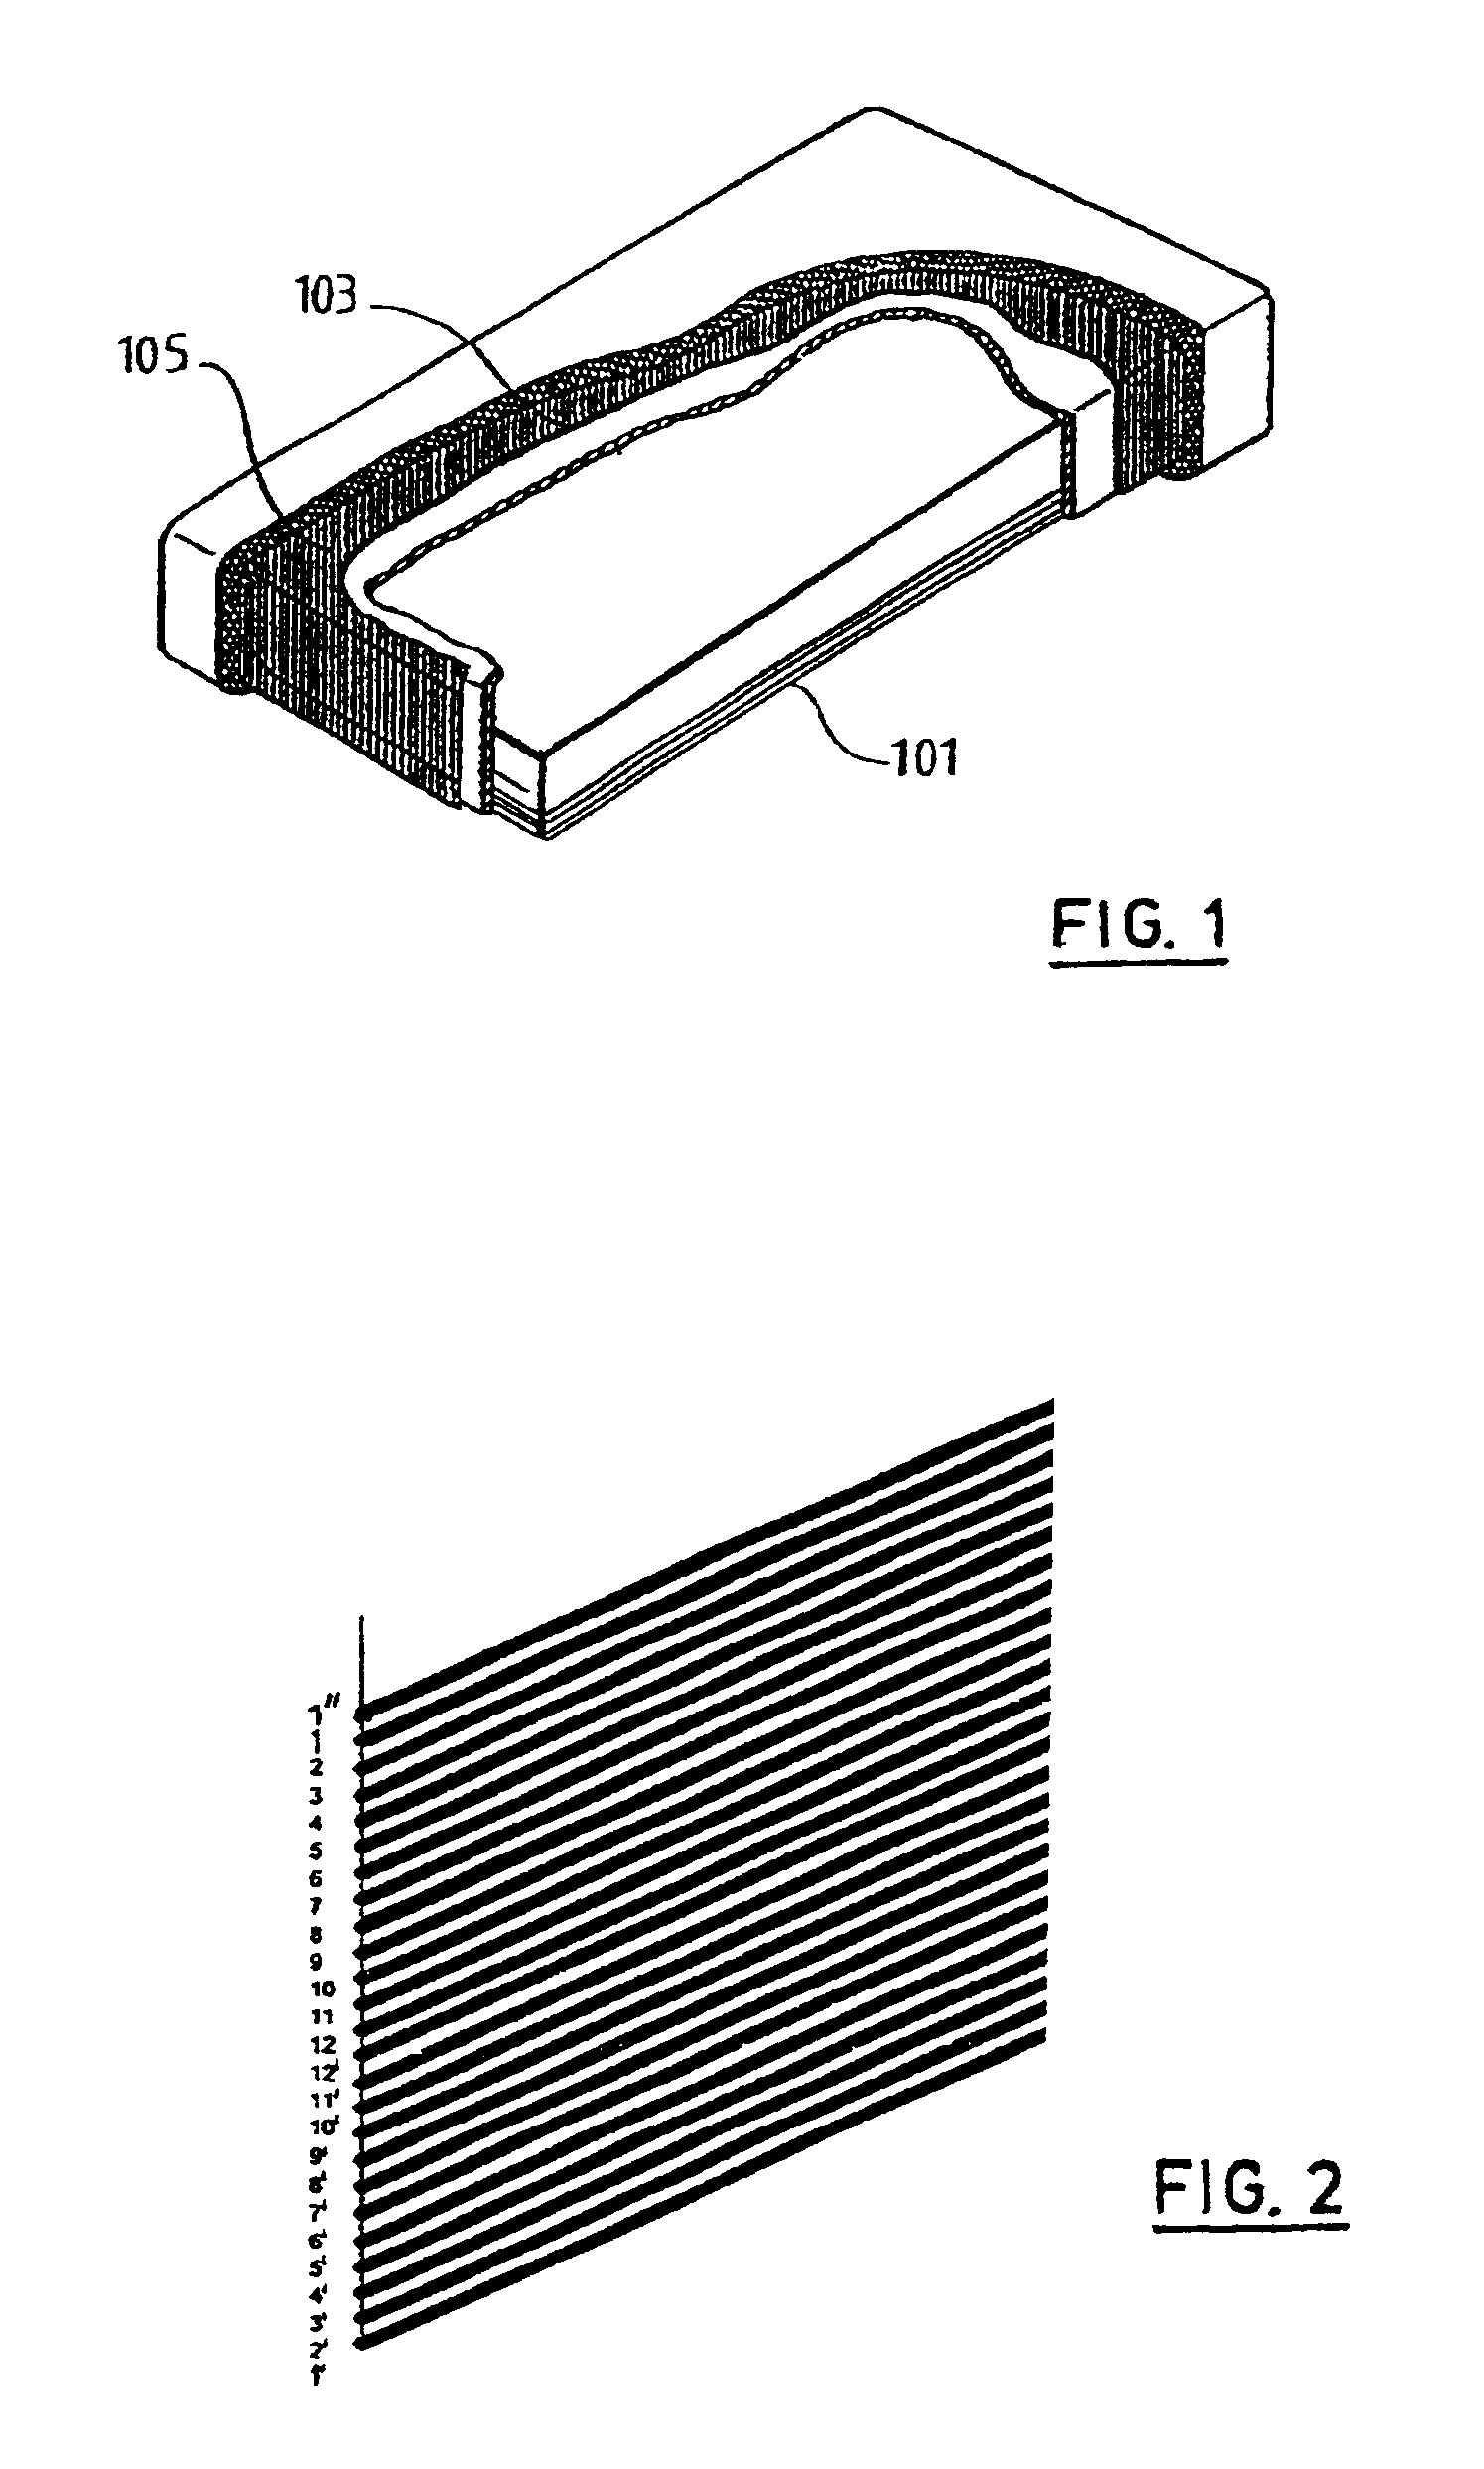 Tamper resistant card enclosure with improved intrusion detection circuit